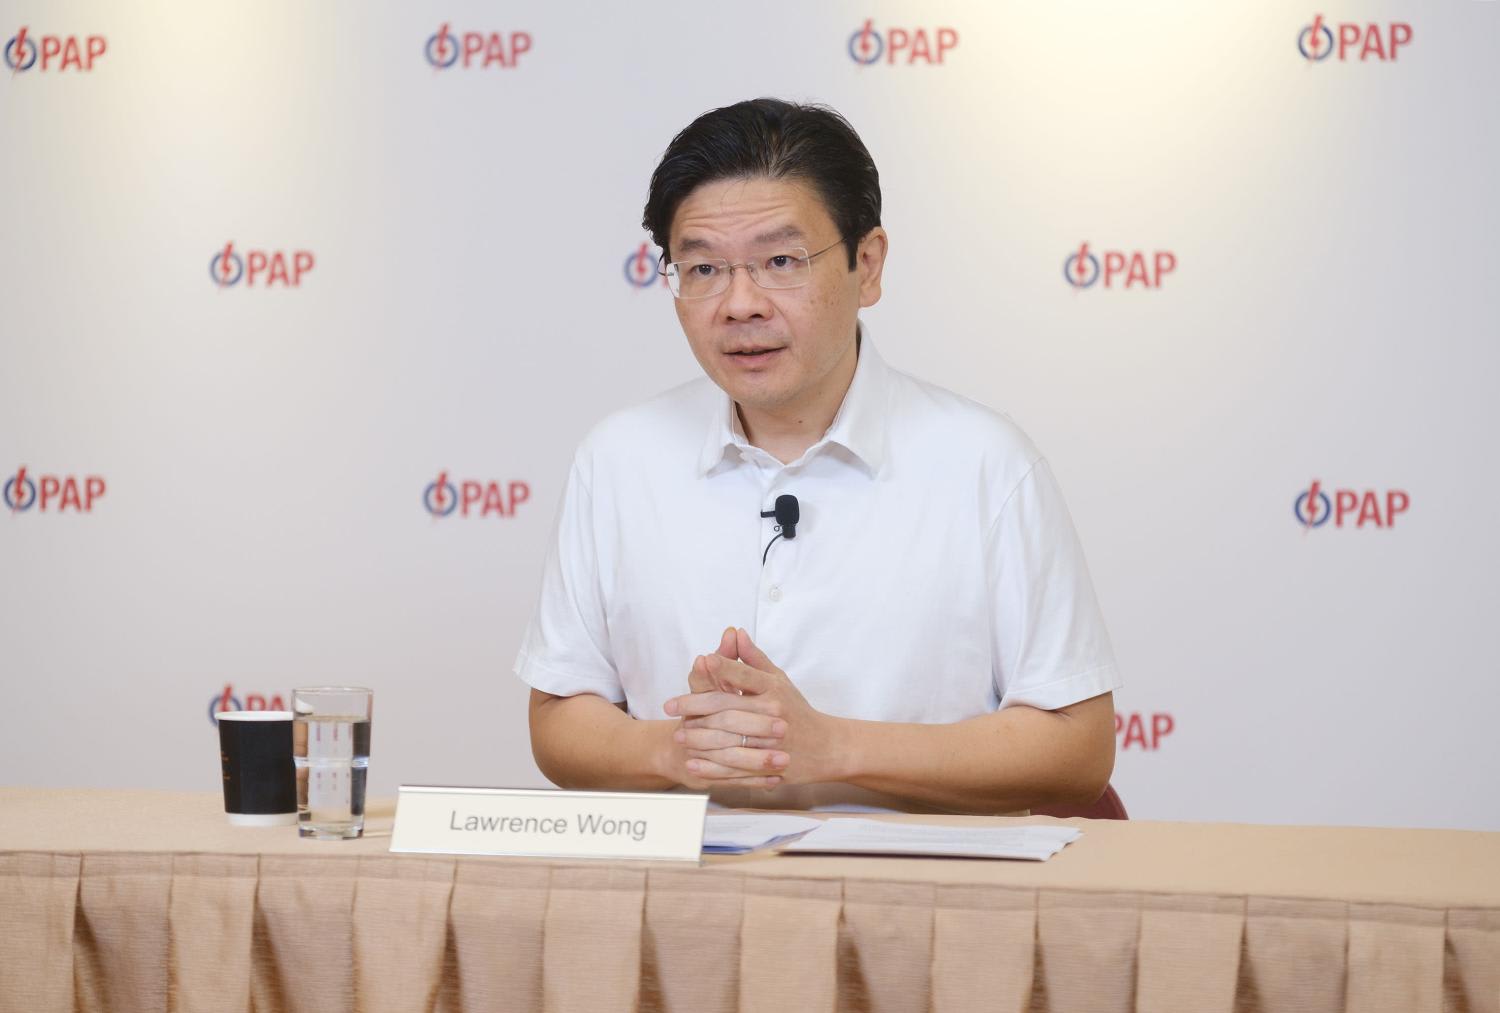 What the Cabinet reshuffle and Lawrence Wong’s promotion to DPM mean for political succession